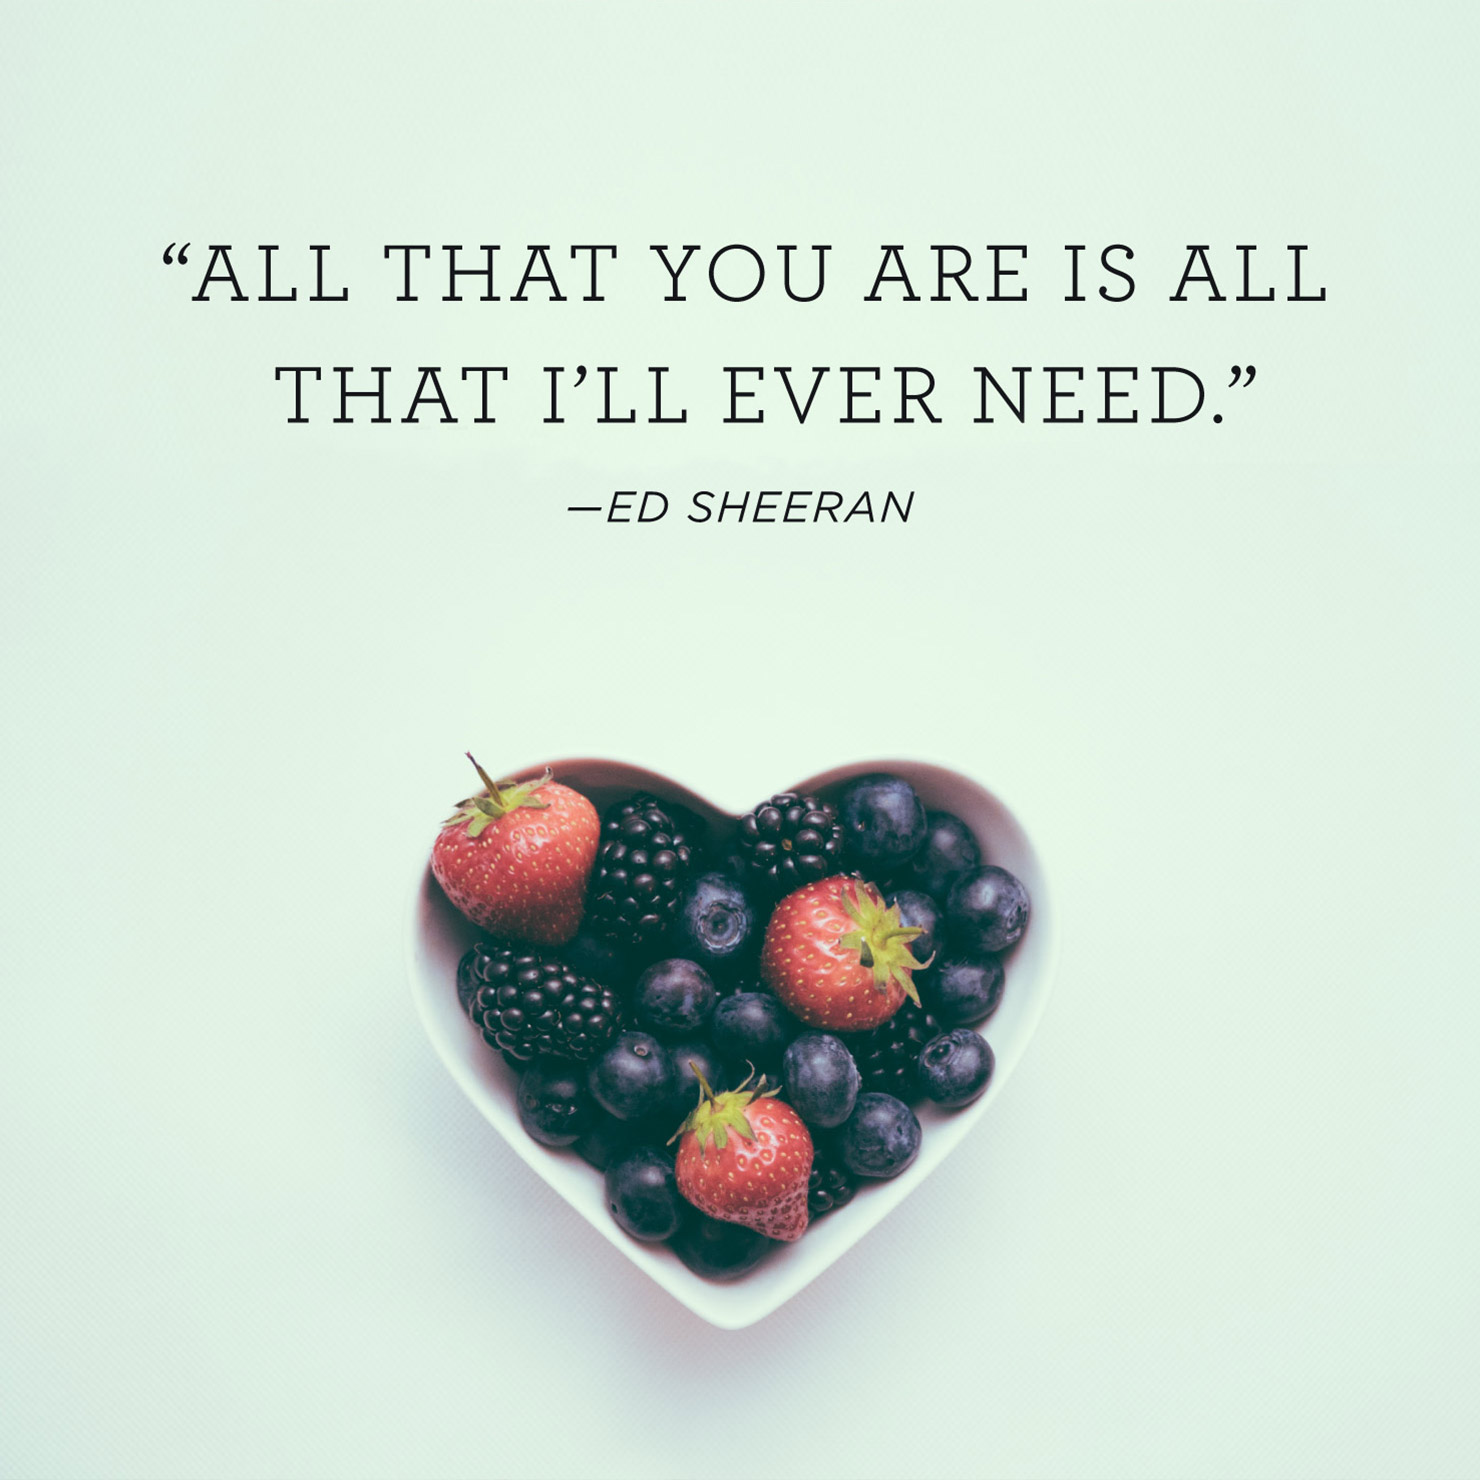 Quote above background image: All that you are is all that I’ll ever need. - Ed Sheeran